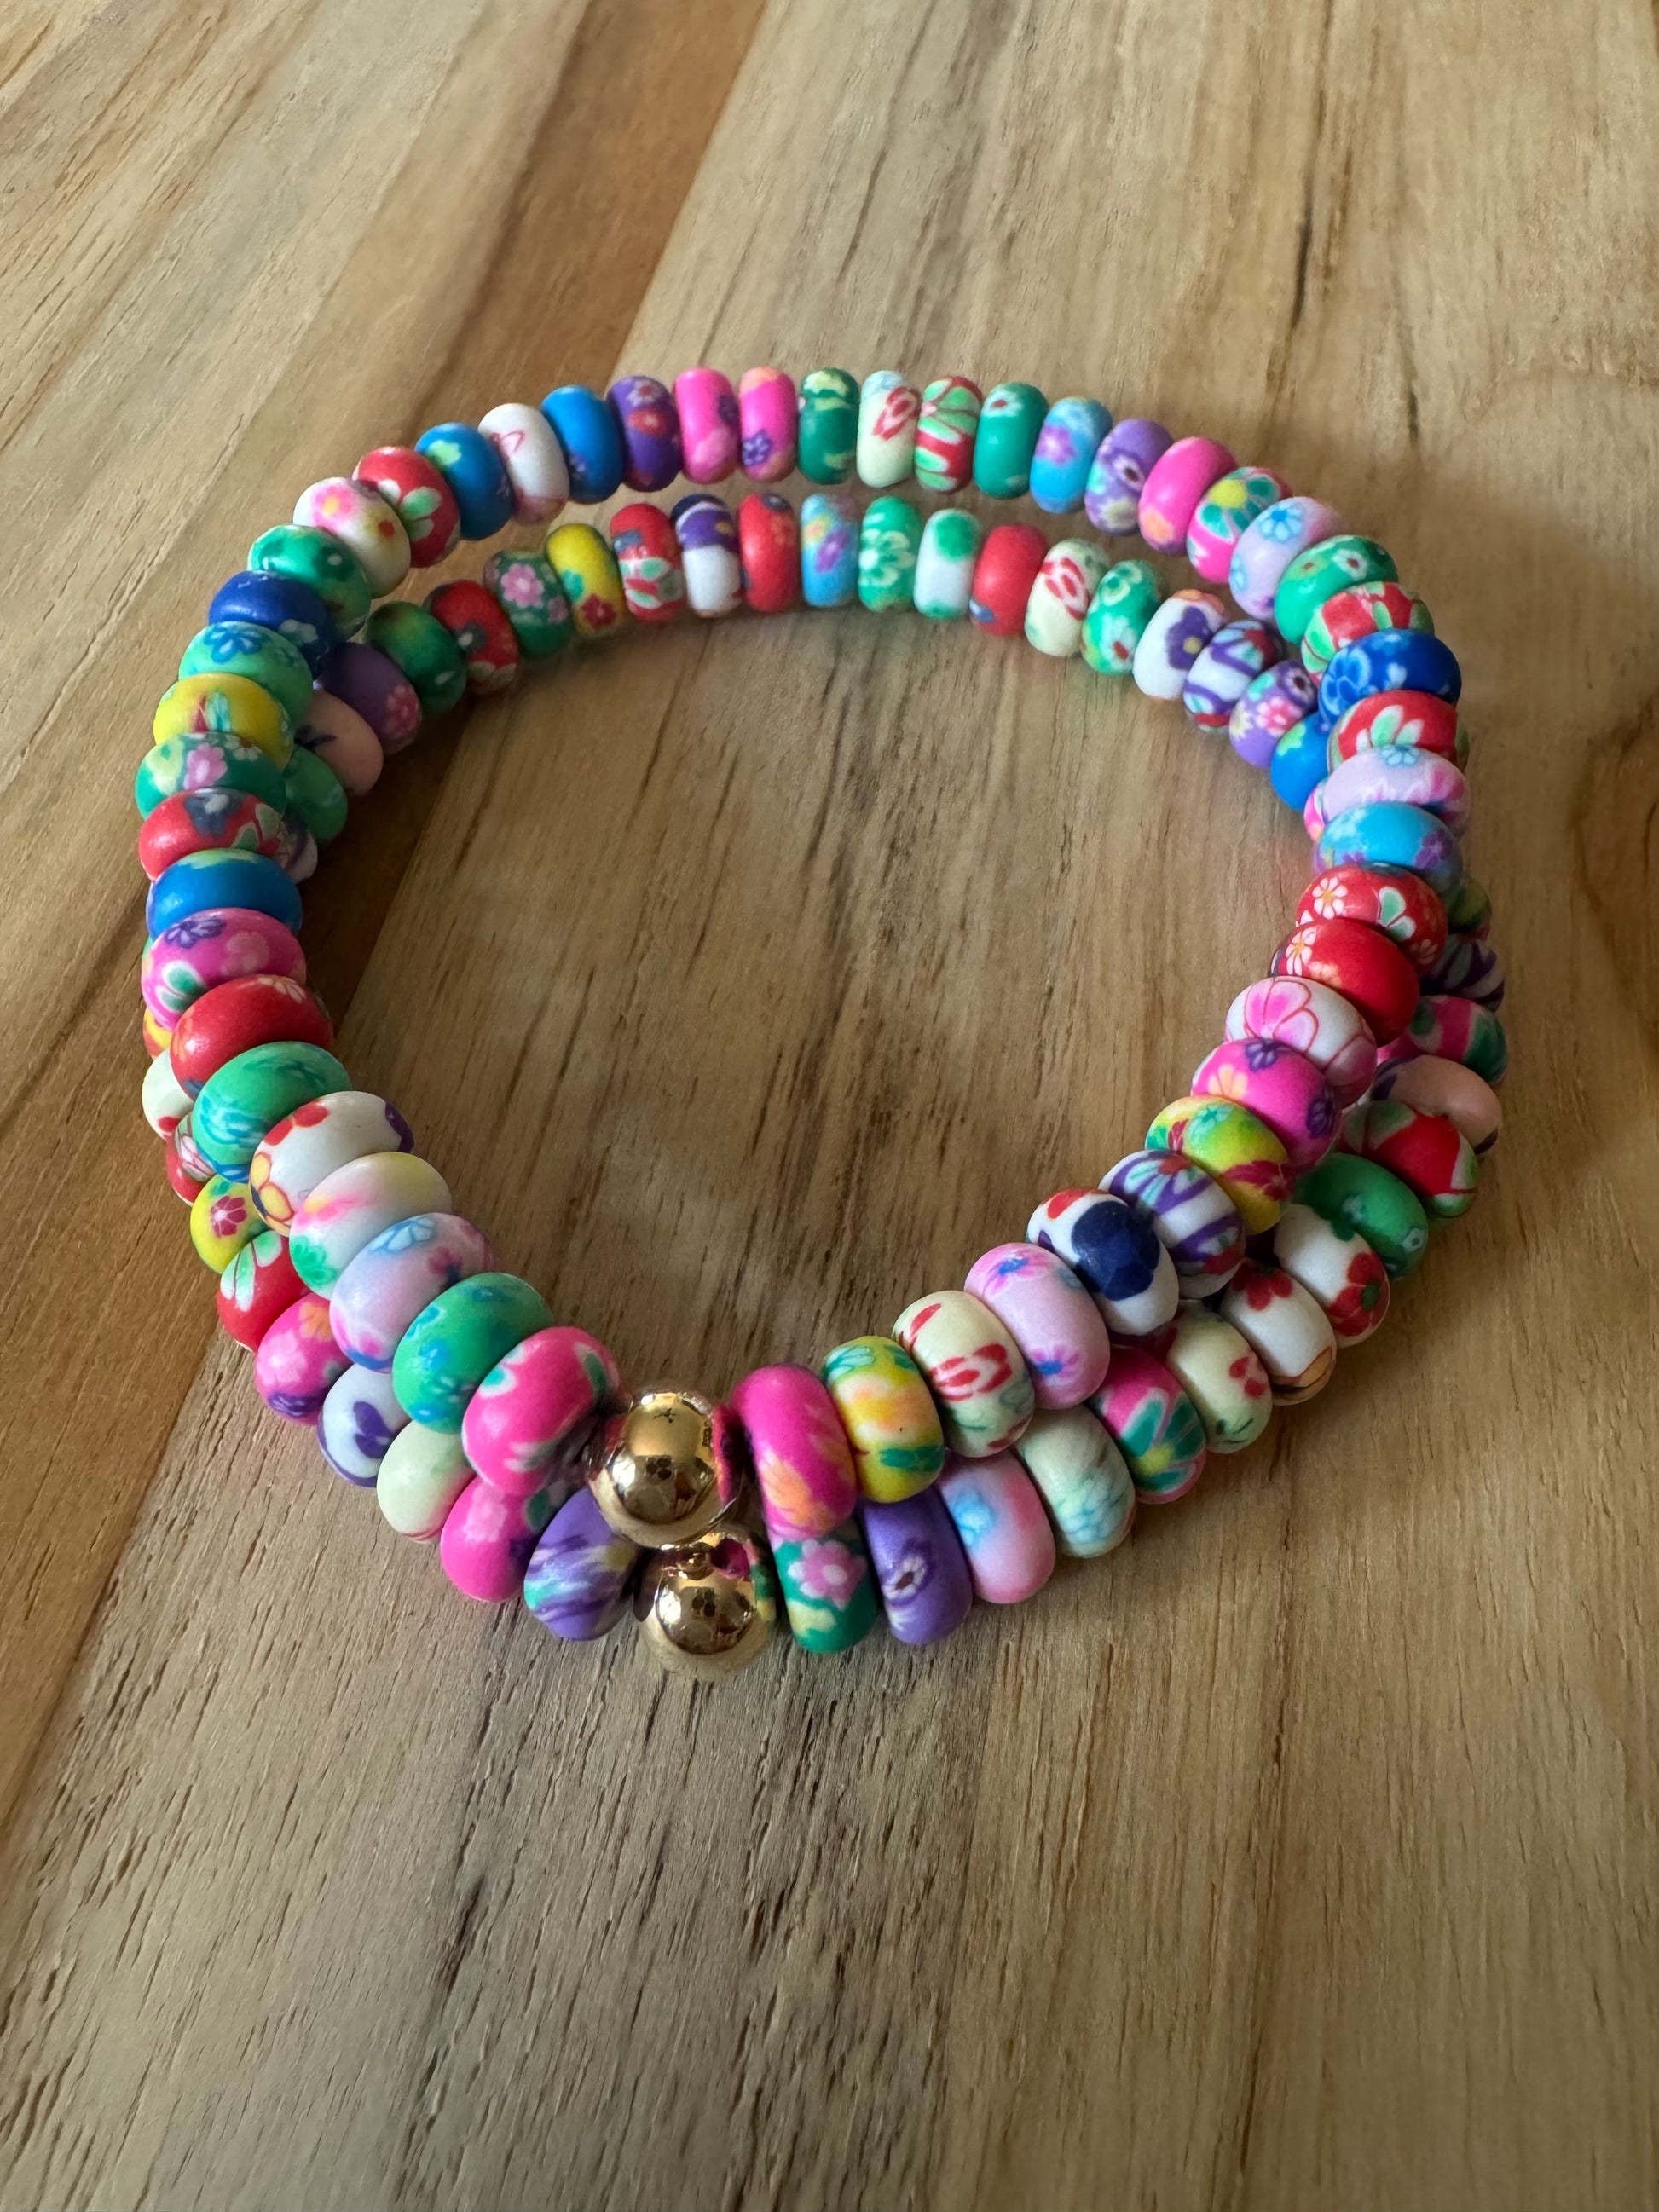 Polymer Clay Multi Colored Floral Rondelle Beads Spring Summer Boho Layering Elastic Stretch Bracelet - My Urban Gems